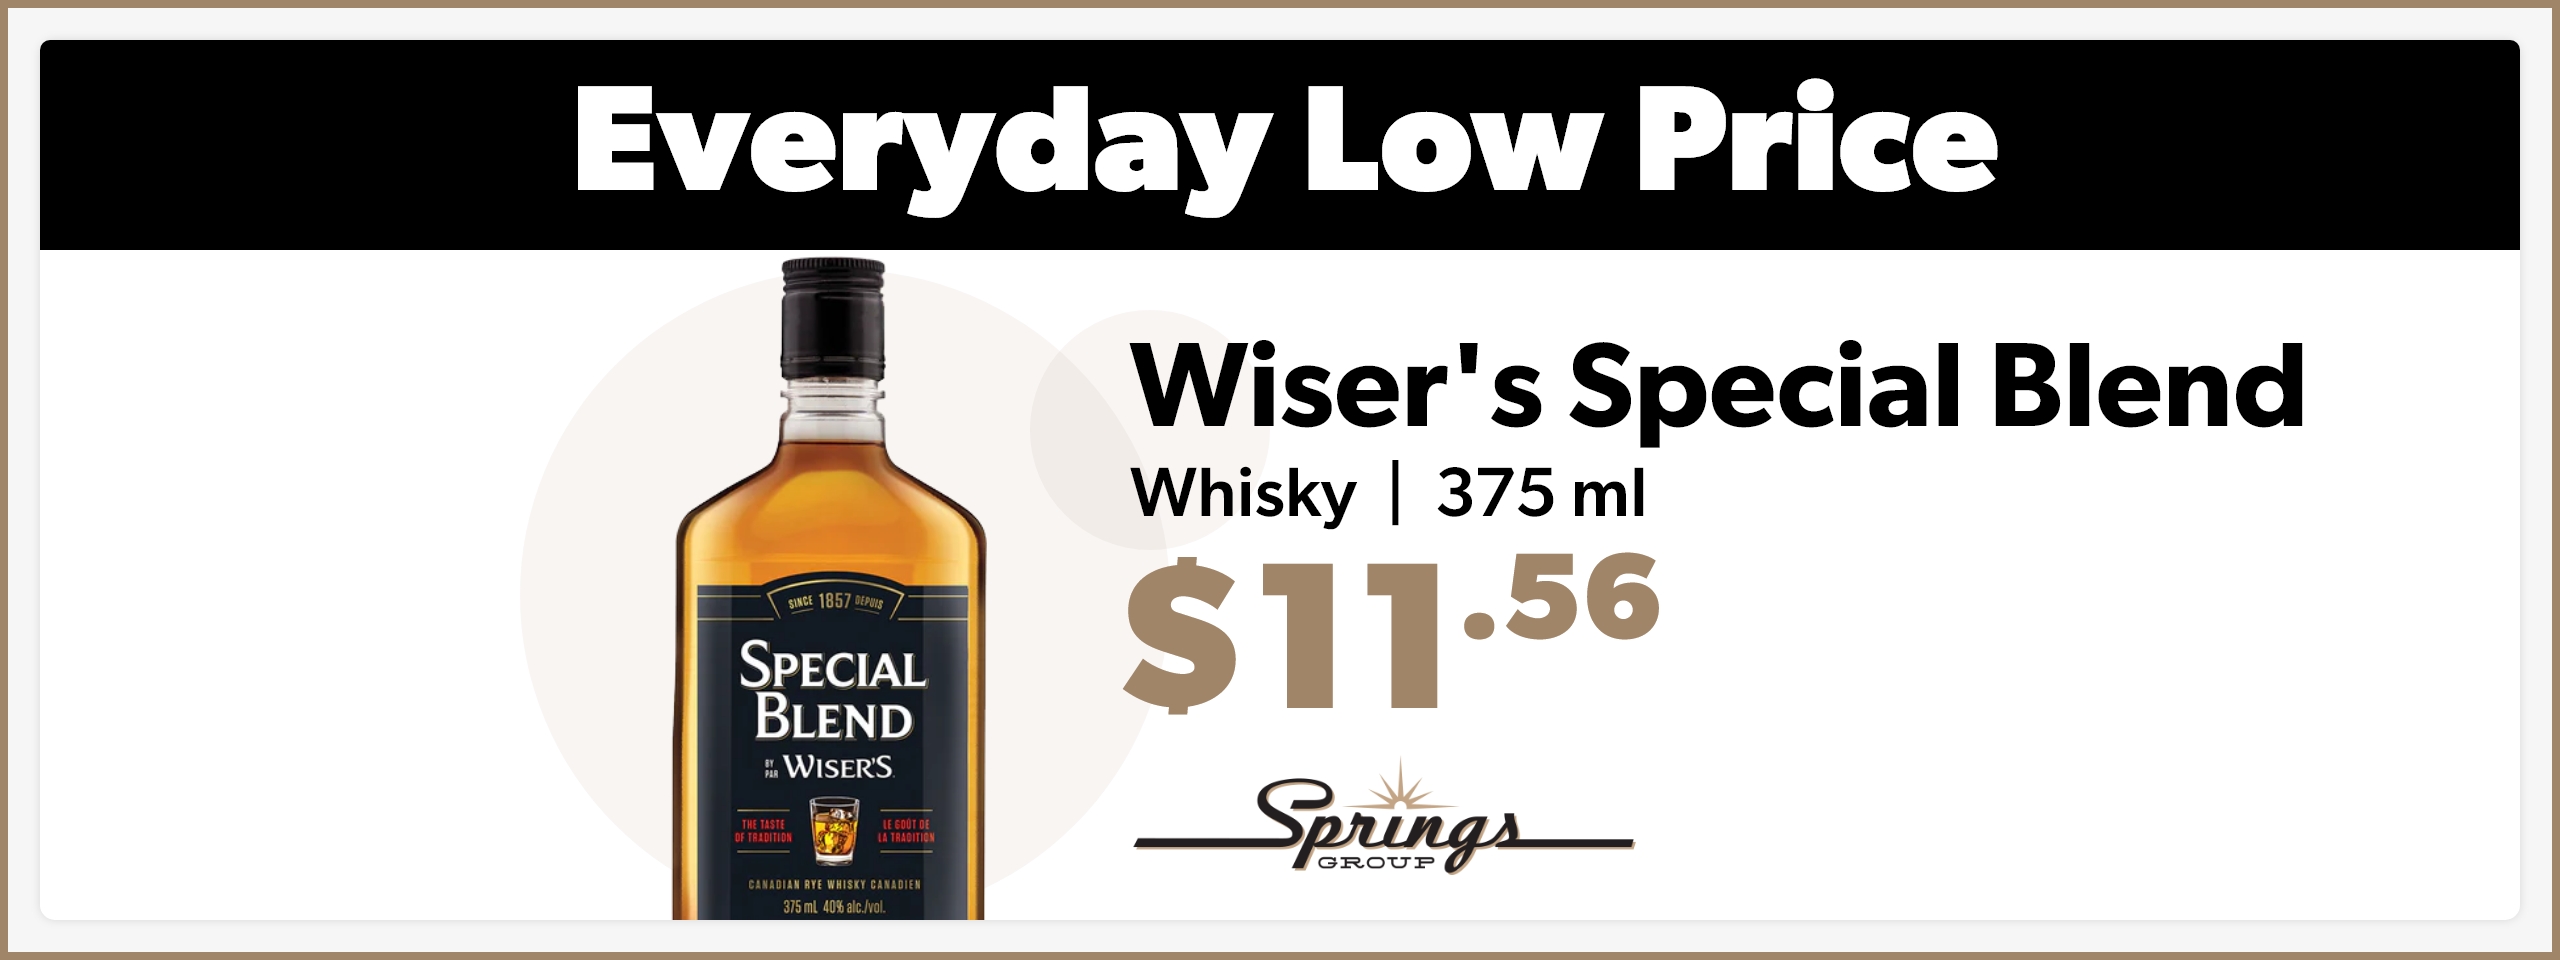 Wiser's everyday low price March